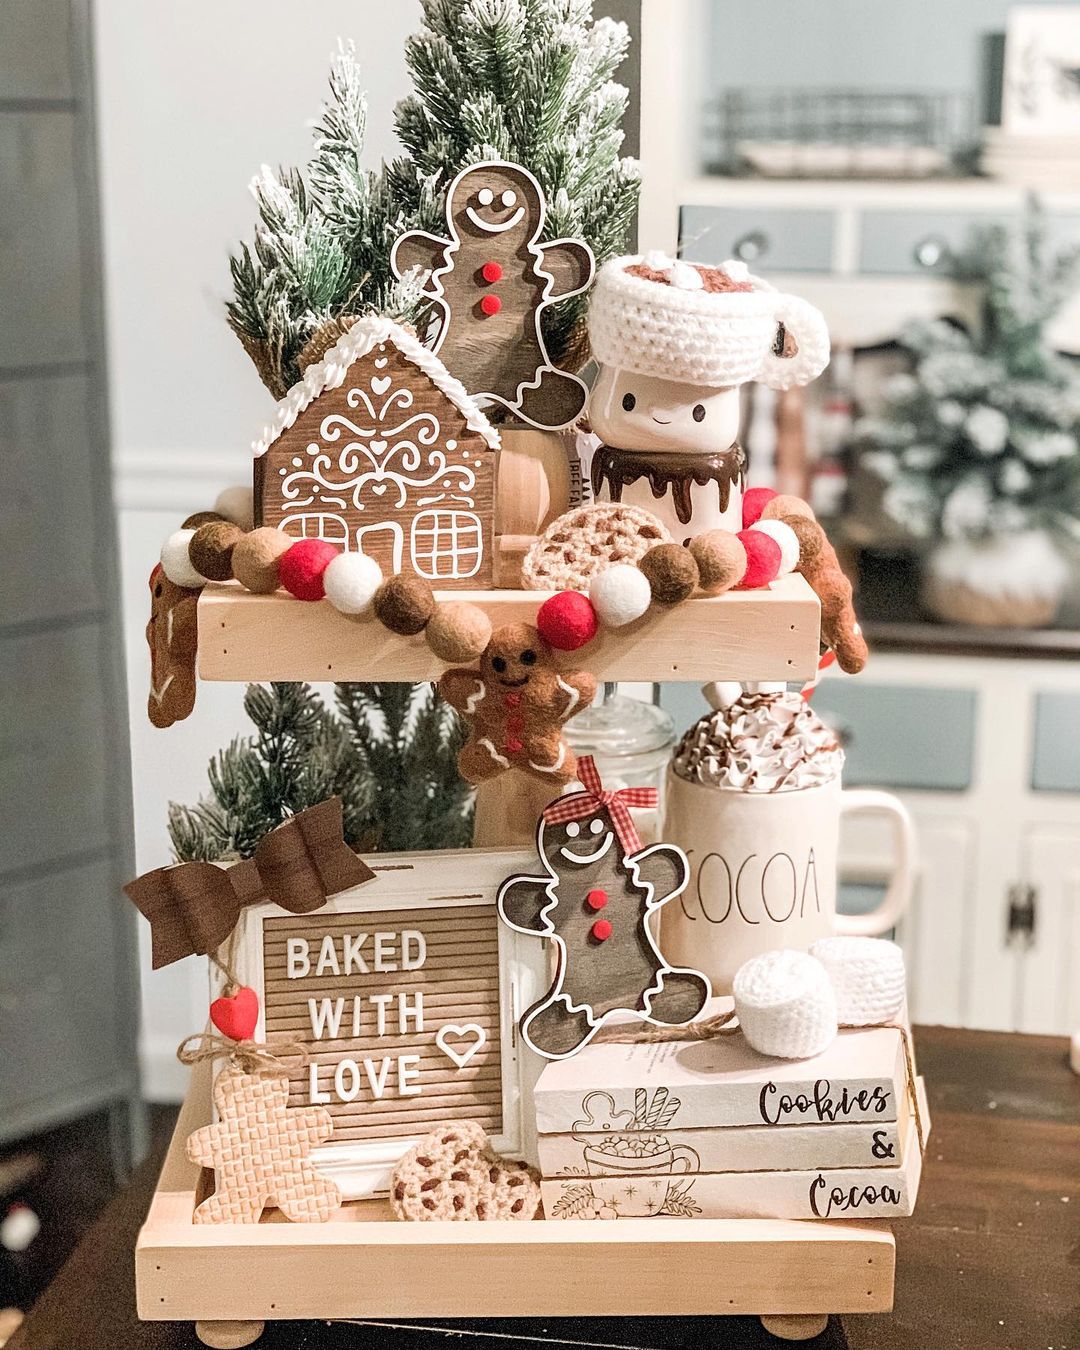 A wooden tiered tray with gingerbread decorations and a sign that says 